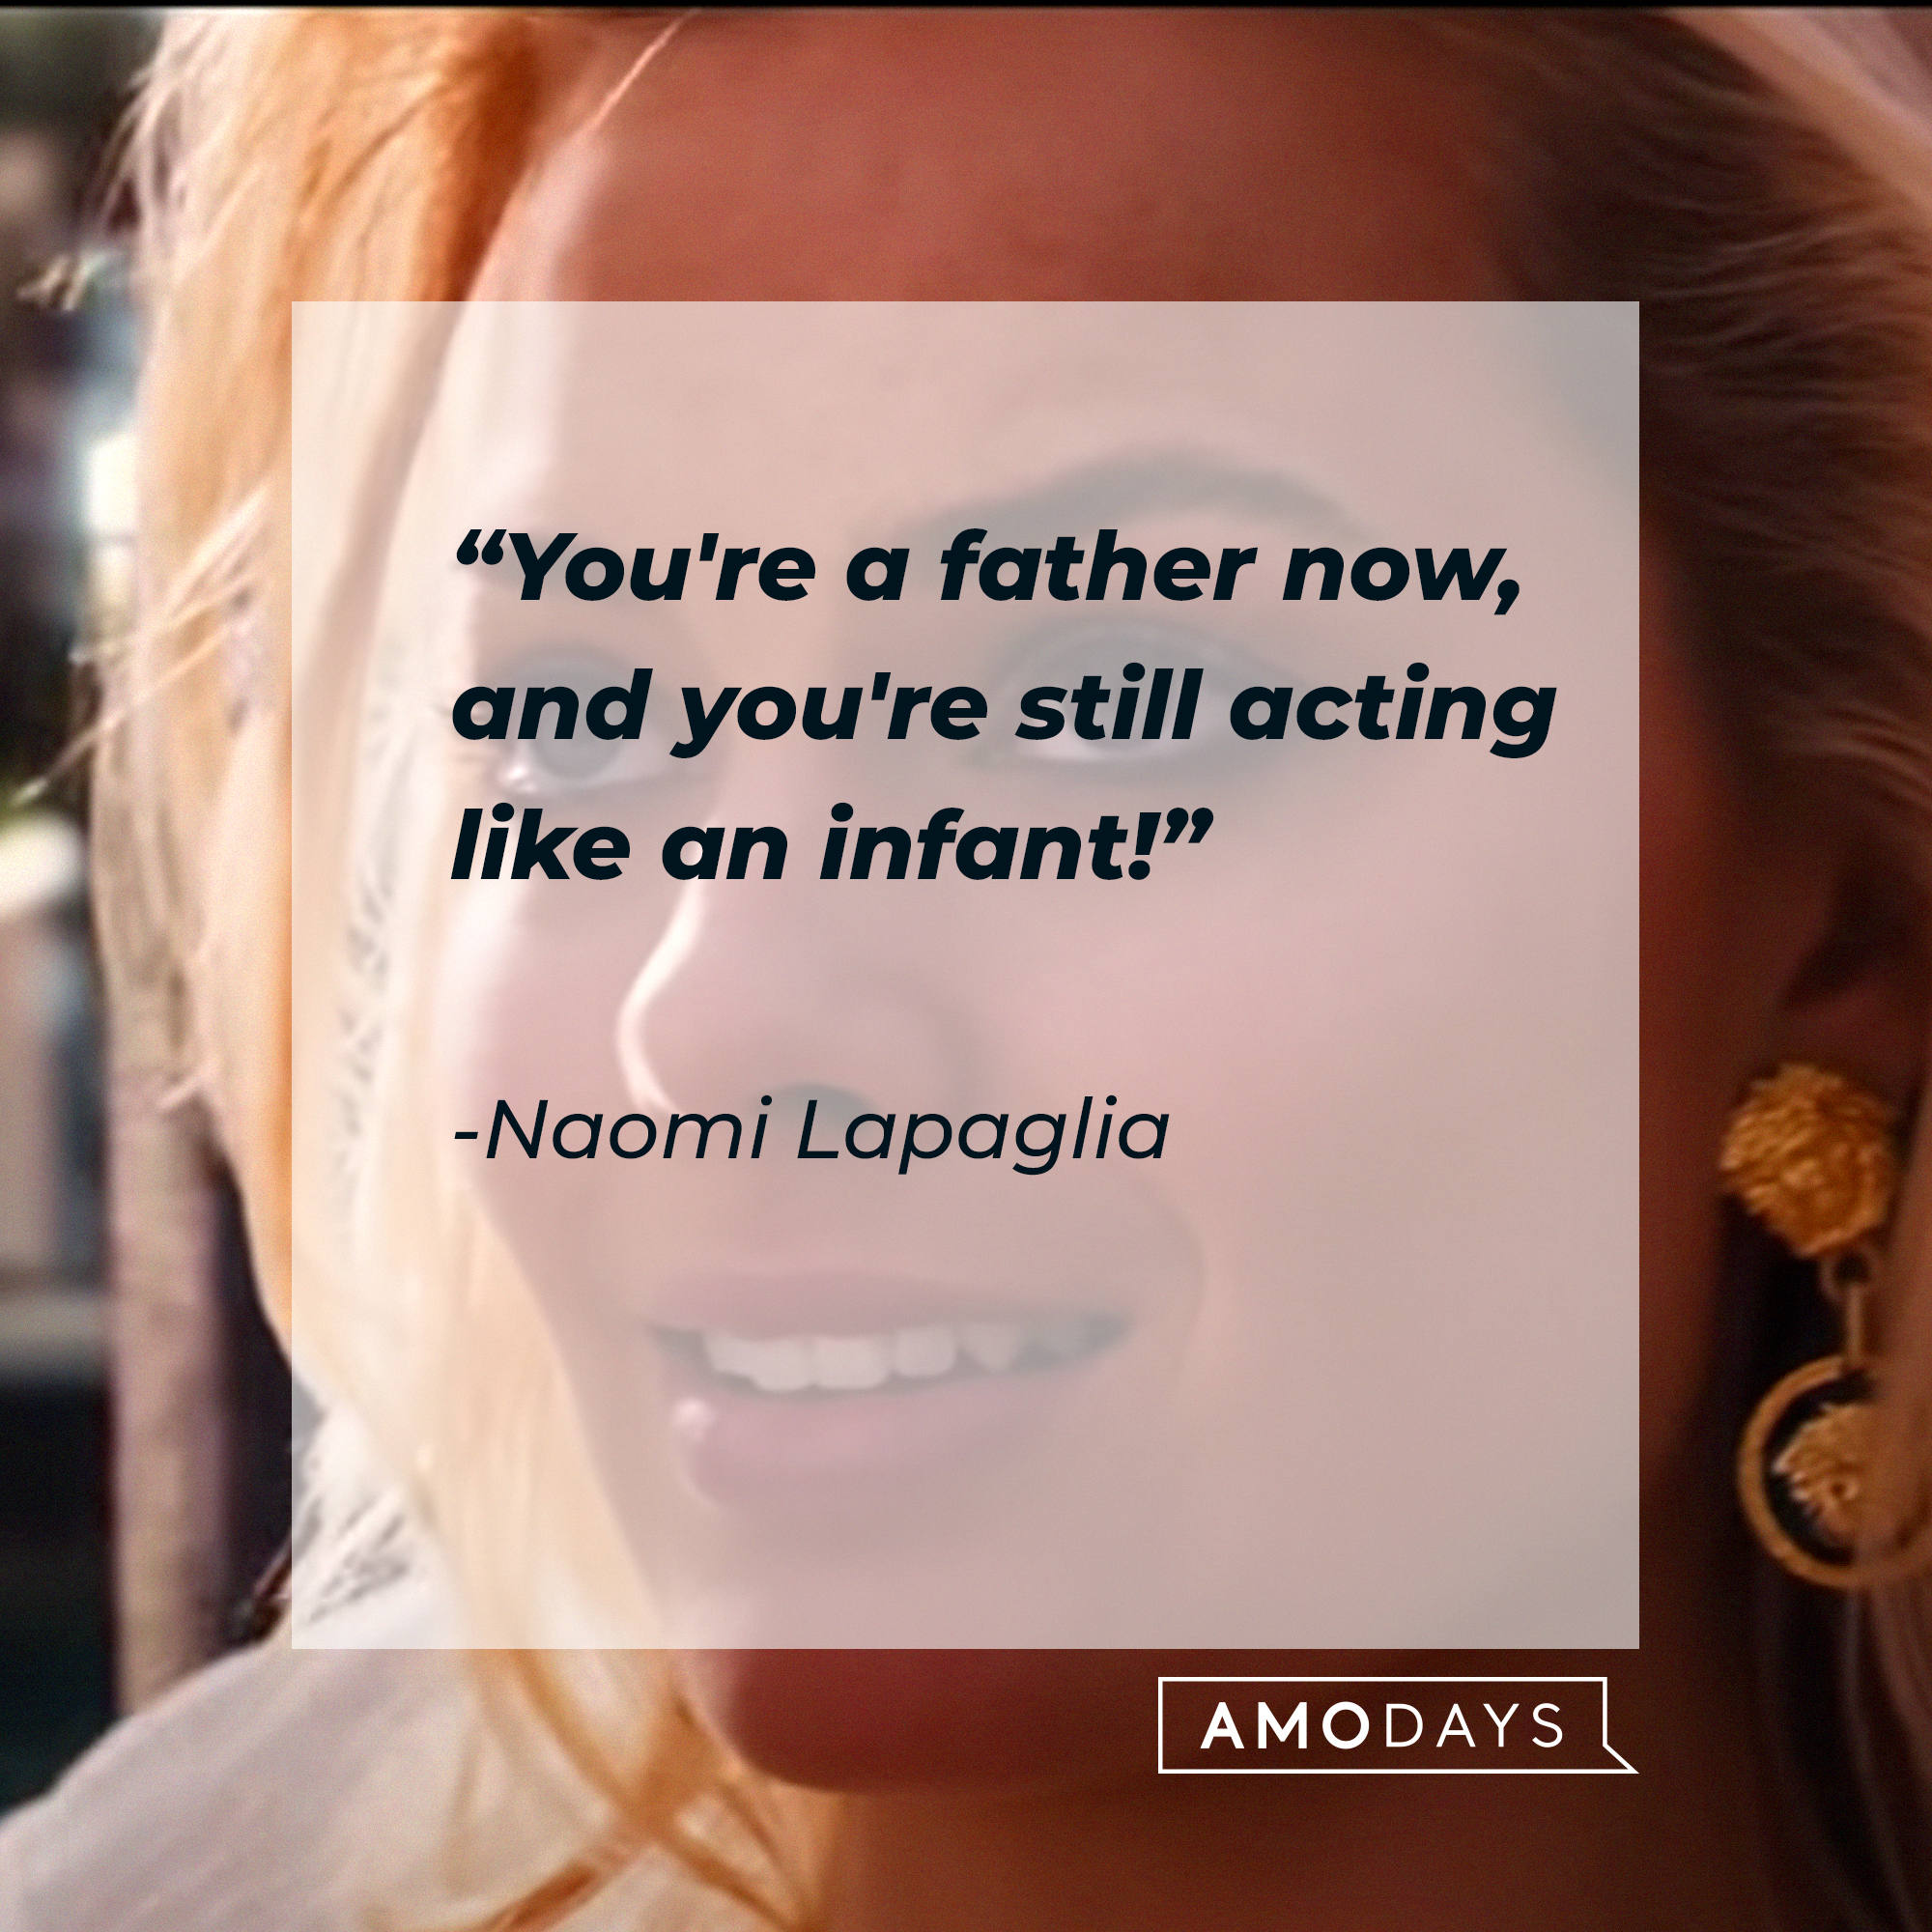 Margot Robbie with her quote: "You're a father now, and you're still acting like an infant!" | Source: Youtube/paramountmovies